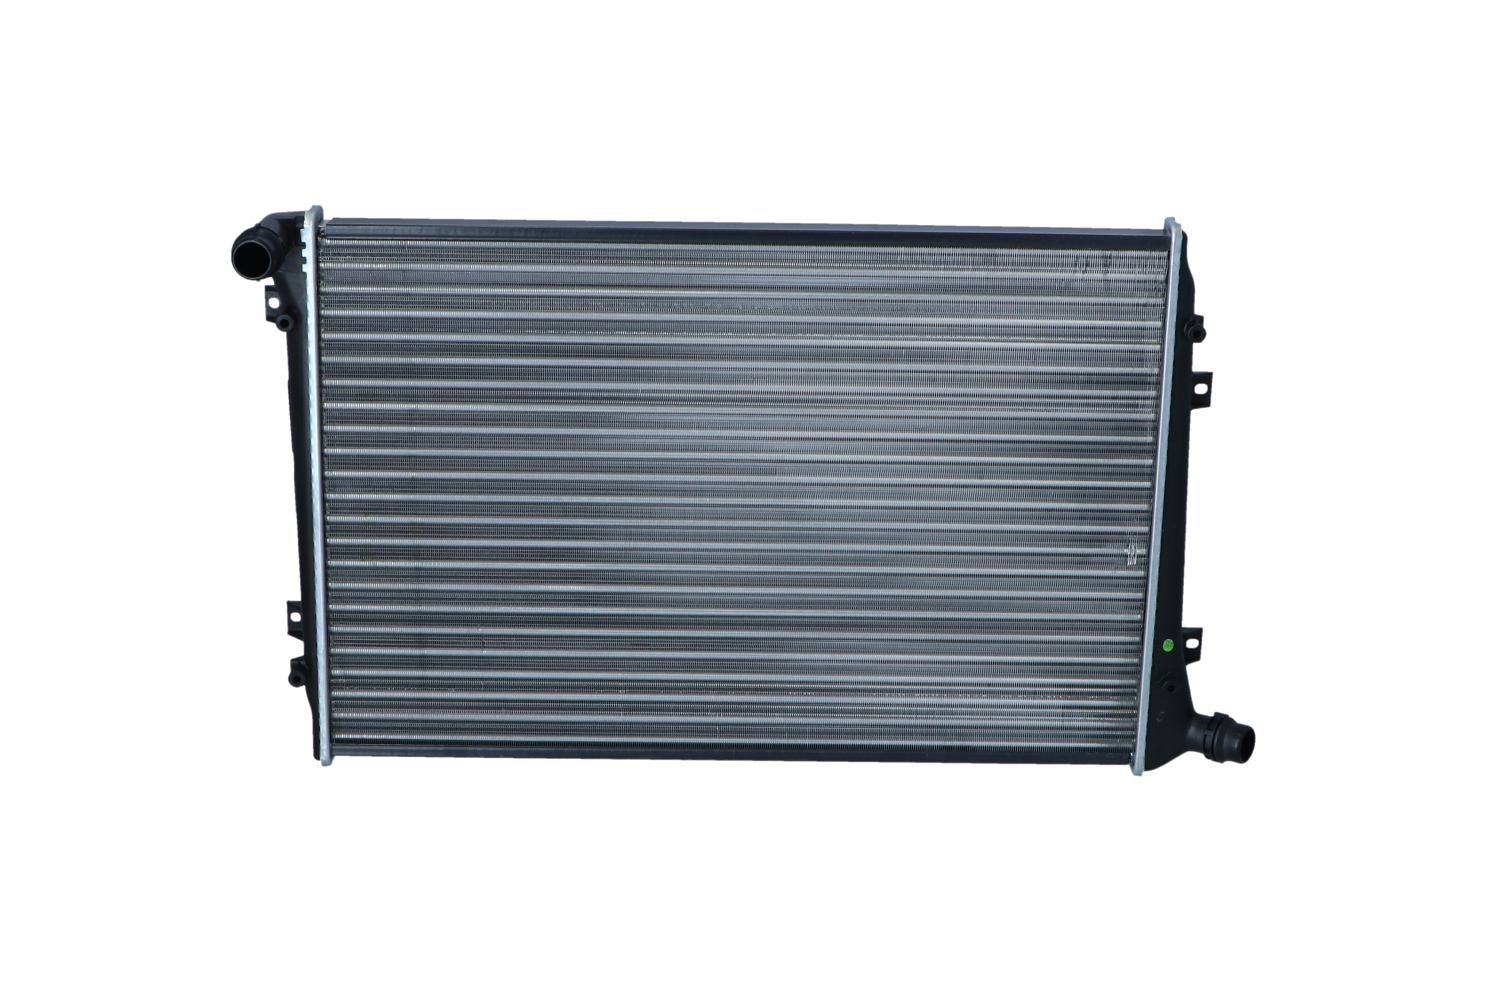 NRF Economy Class 53814A Engine radiator Aluminium, 654 x 433 x 32 mm, Mechanically jointed cooling fins